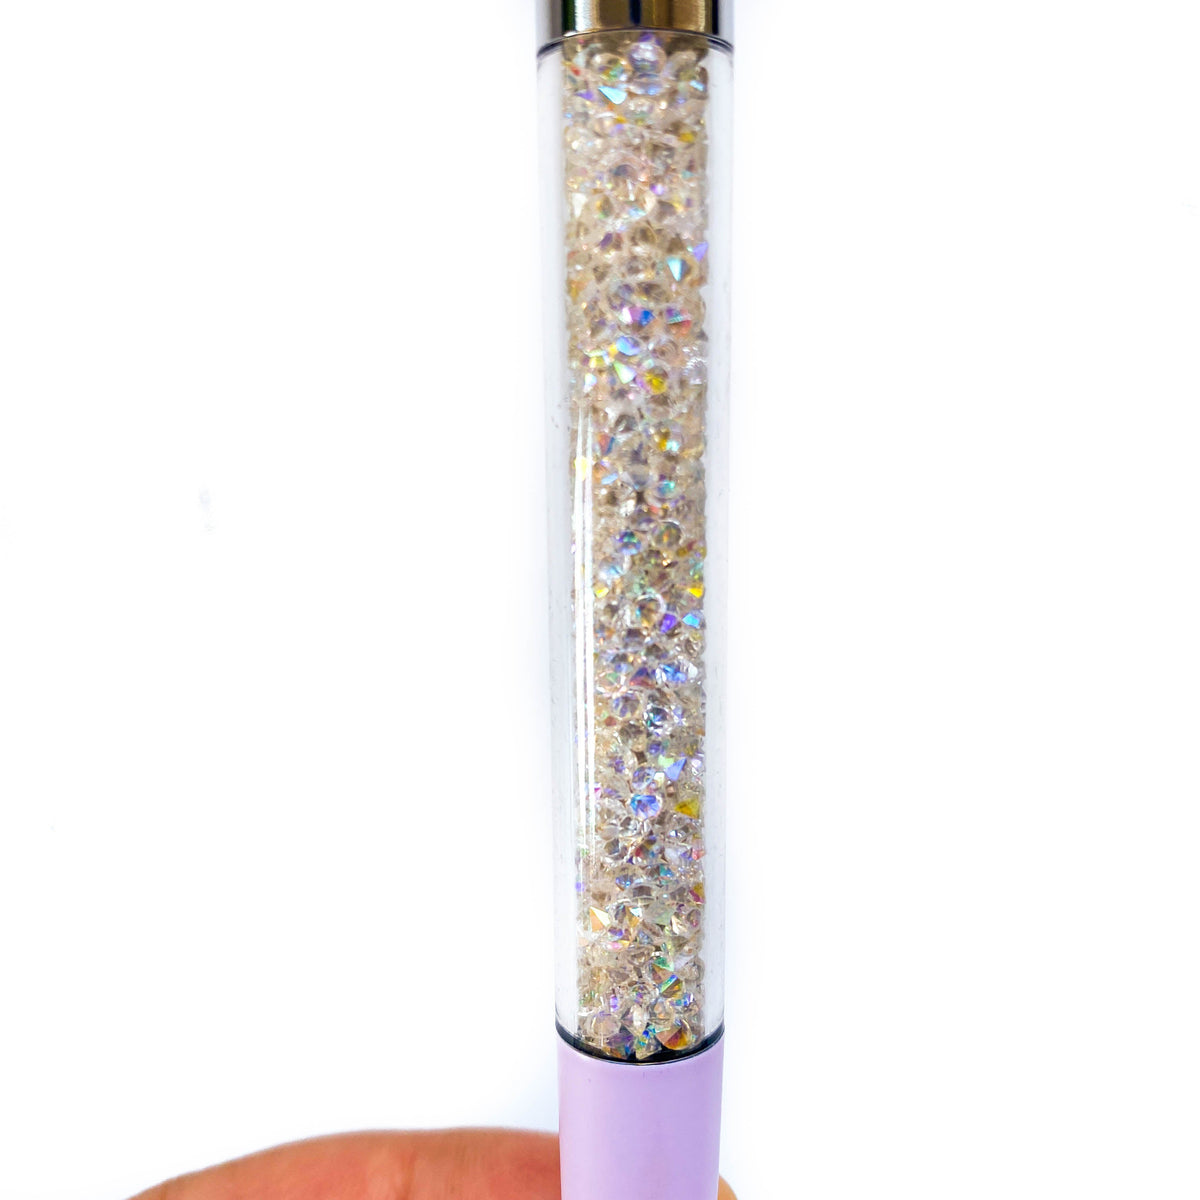 Shine Bright Imperfect Crystal VBPen | limited kit pen